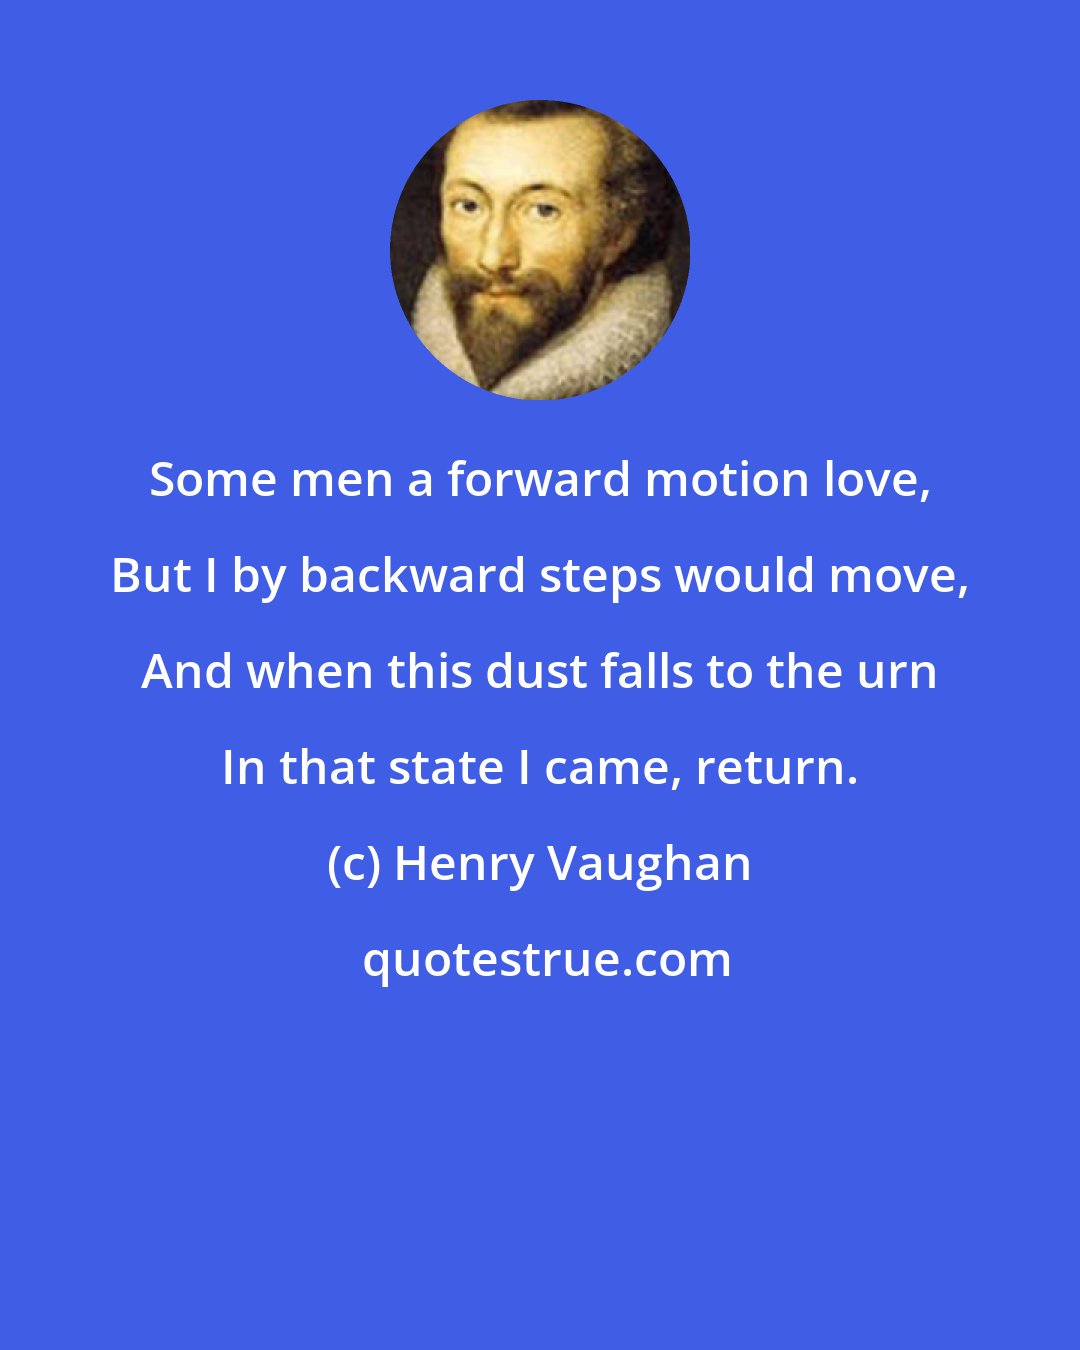 Henry Vaughan: Some men a forward motion love, But I by backward steps would move, And when this dust falls to the urn In that state I came, return.